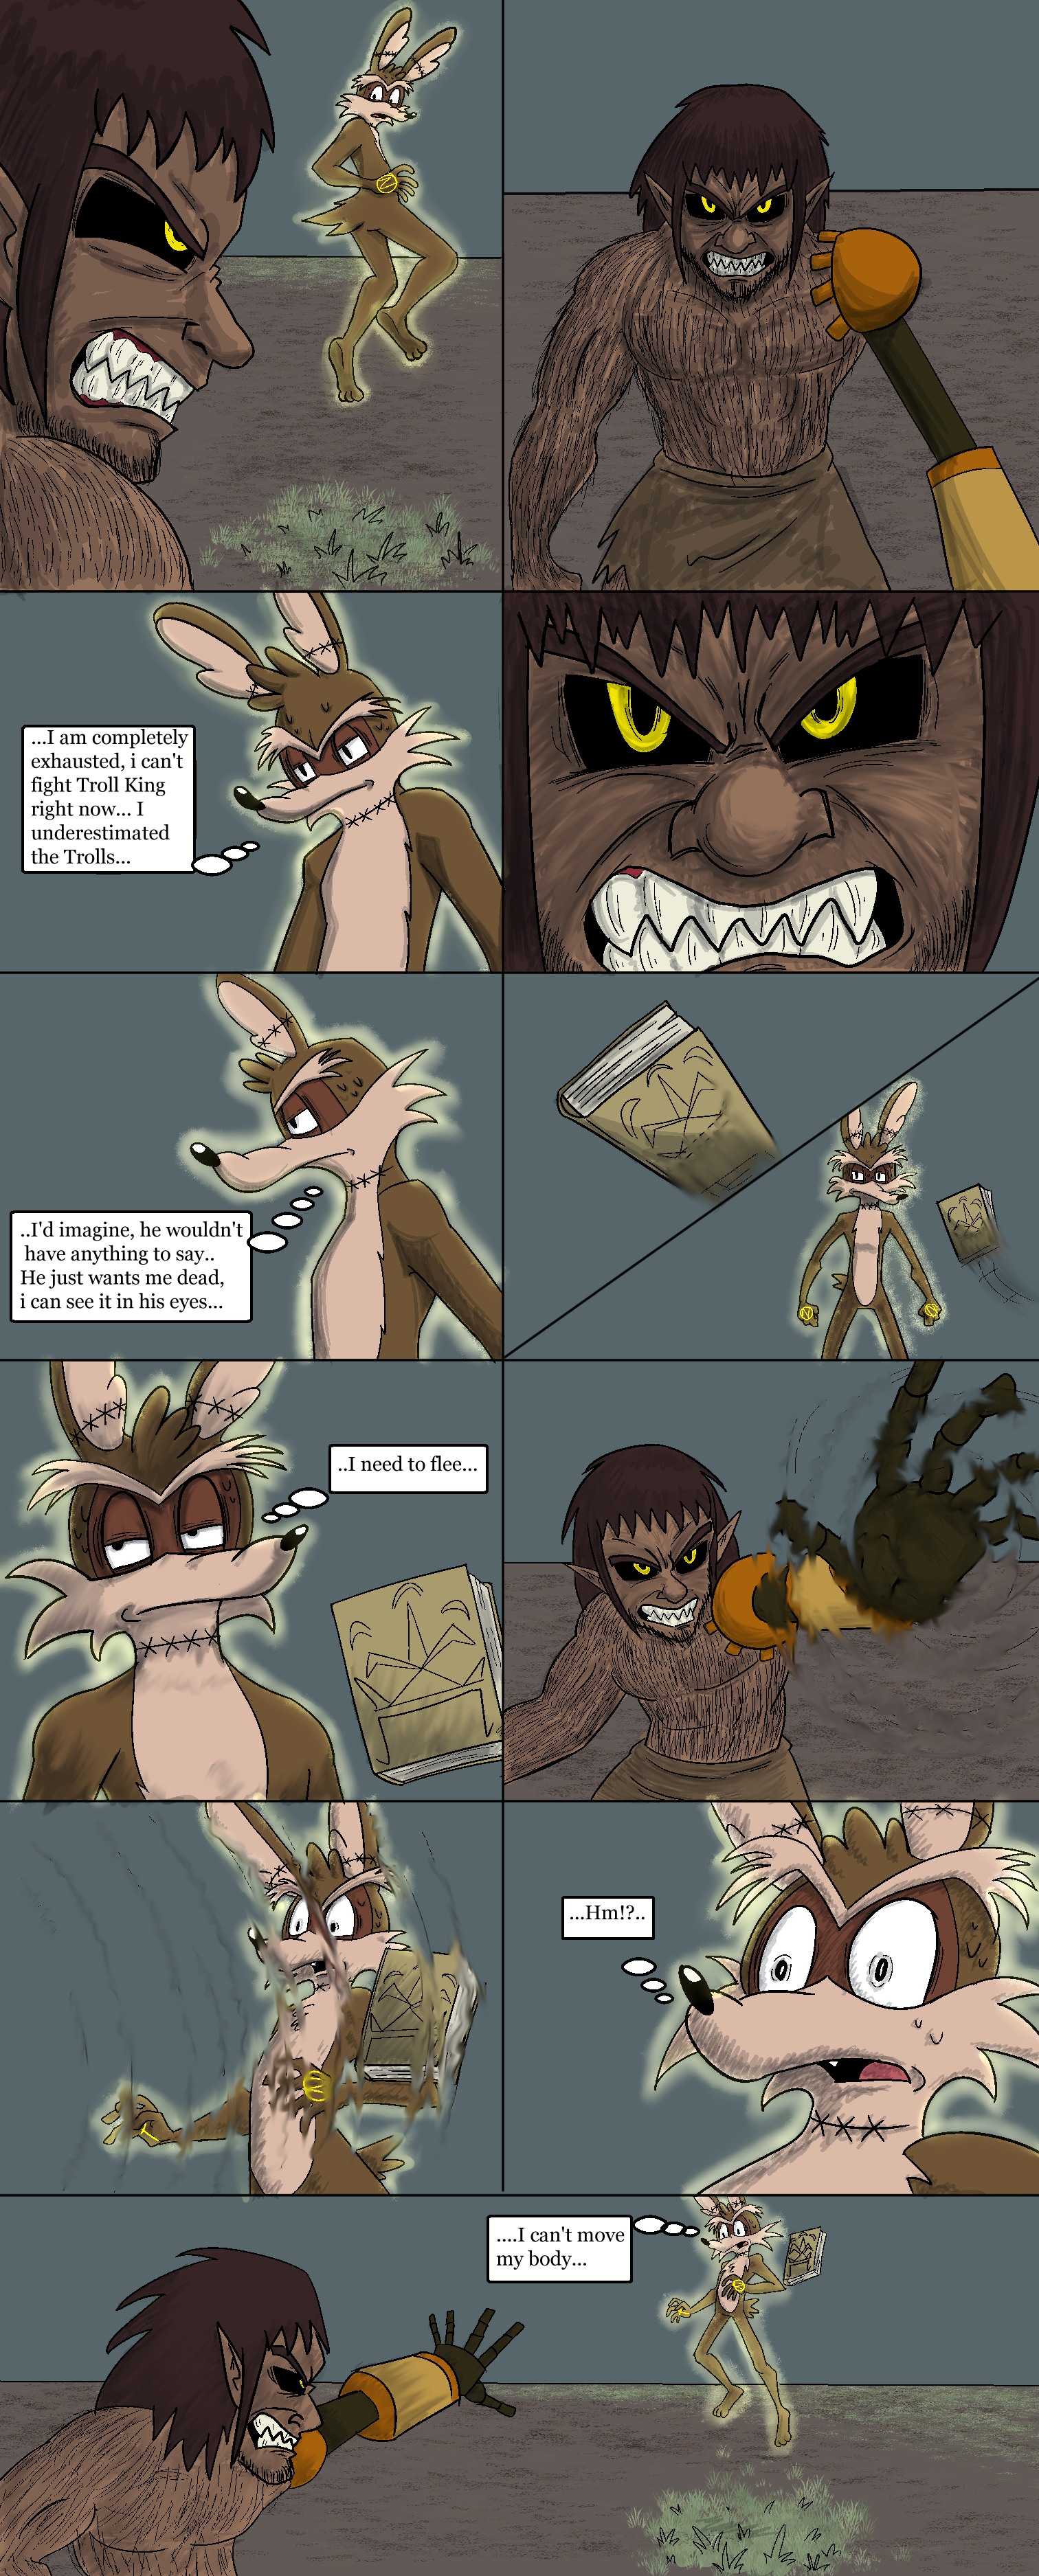 ch25/pg20.png. If you're seeing this, enable images. Or, perhaps we have a website issue. Try refreshing, if unsuccessful email commodorian@tailsgetstrolled.org with a detailed description of how you got here.